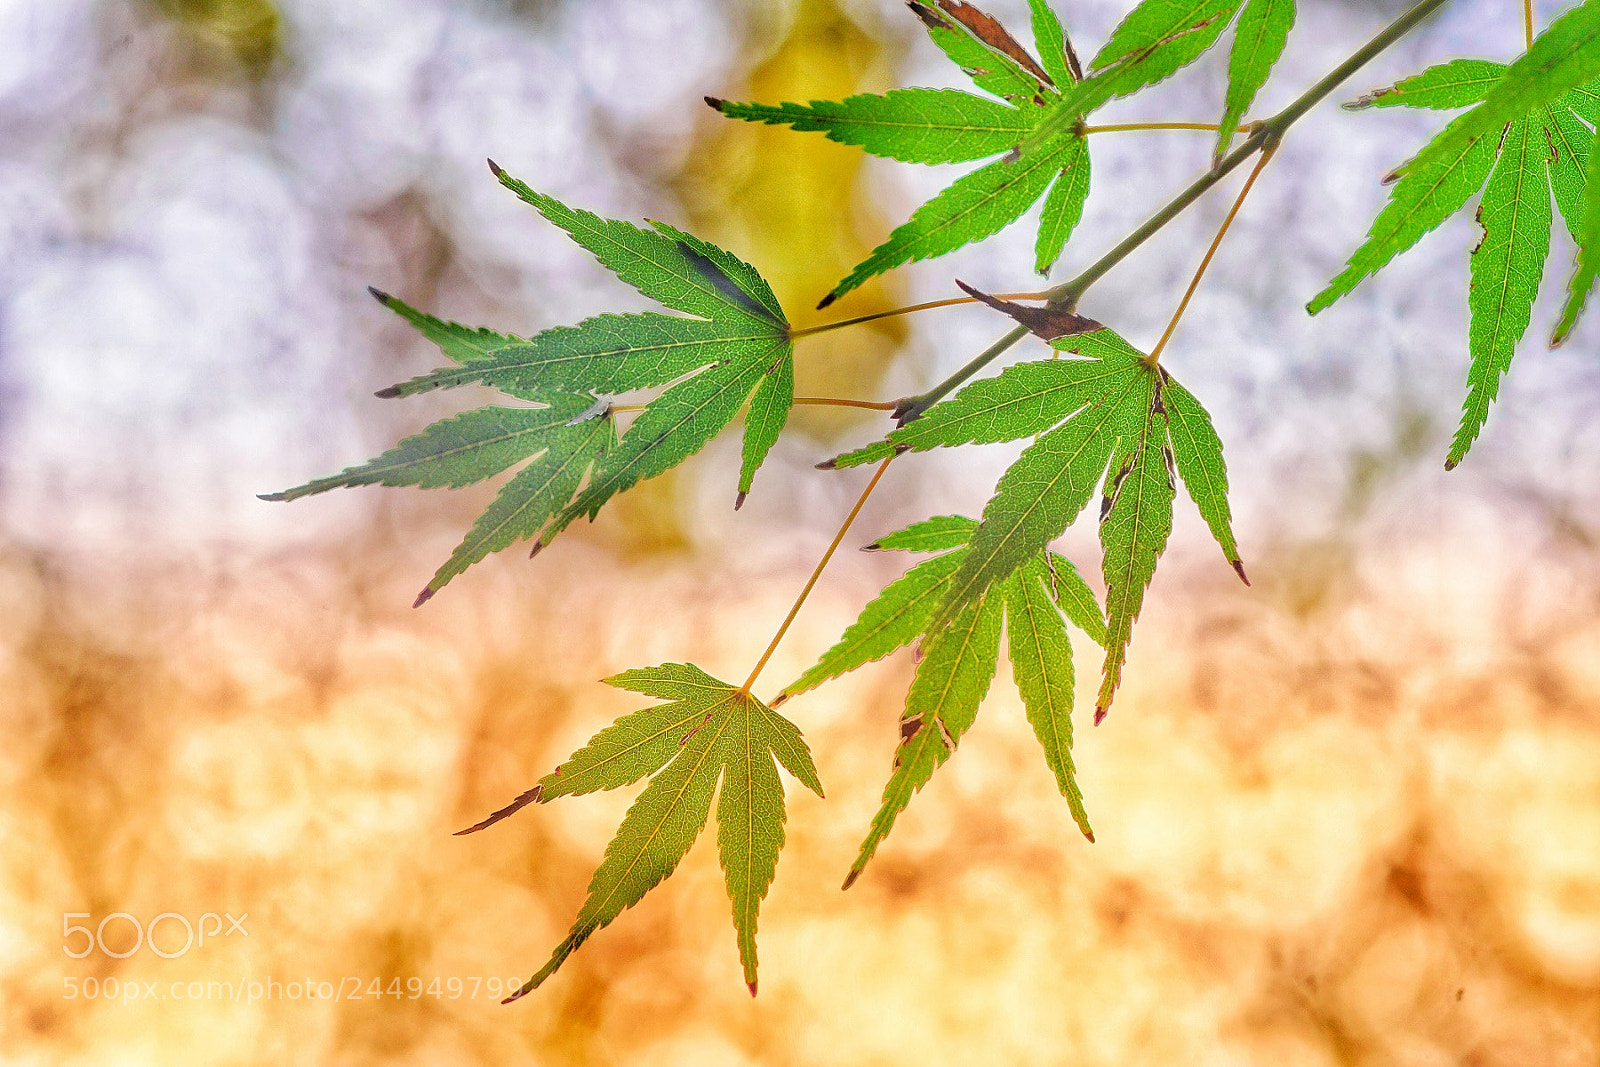 Sony a7R II sample photo. Maples leaves in the photography